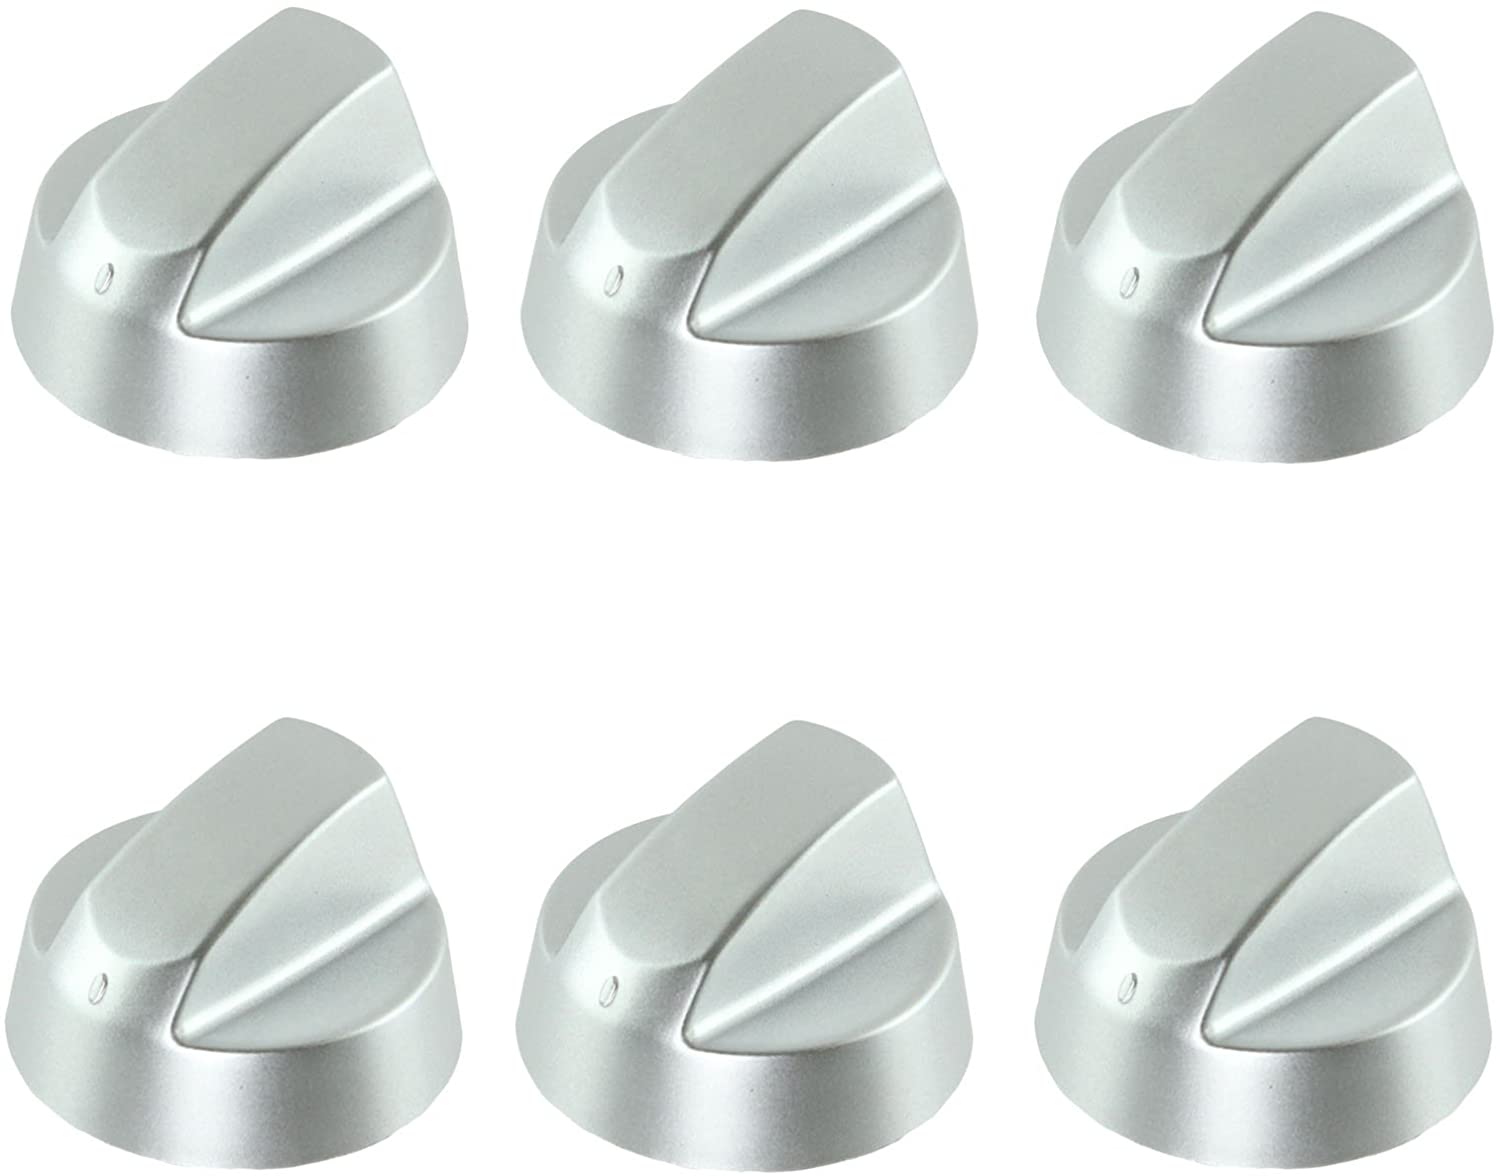 Control Knob Dial & Adaptors for AEG Oven / Cooker (Silver, Pack of 6)